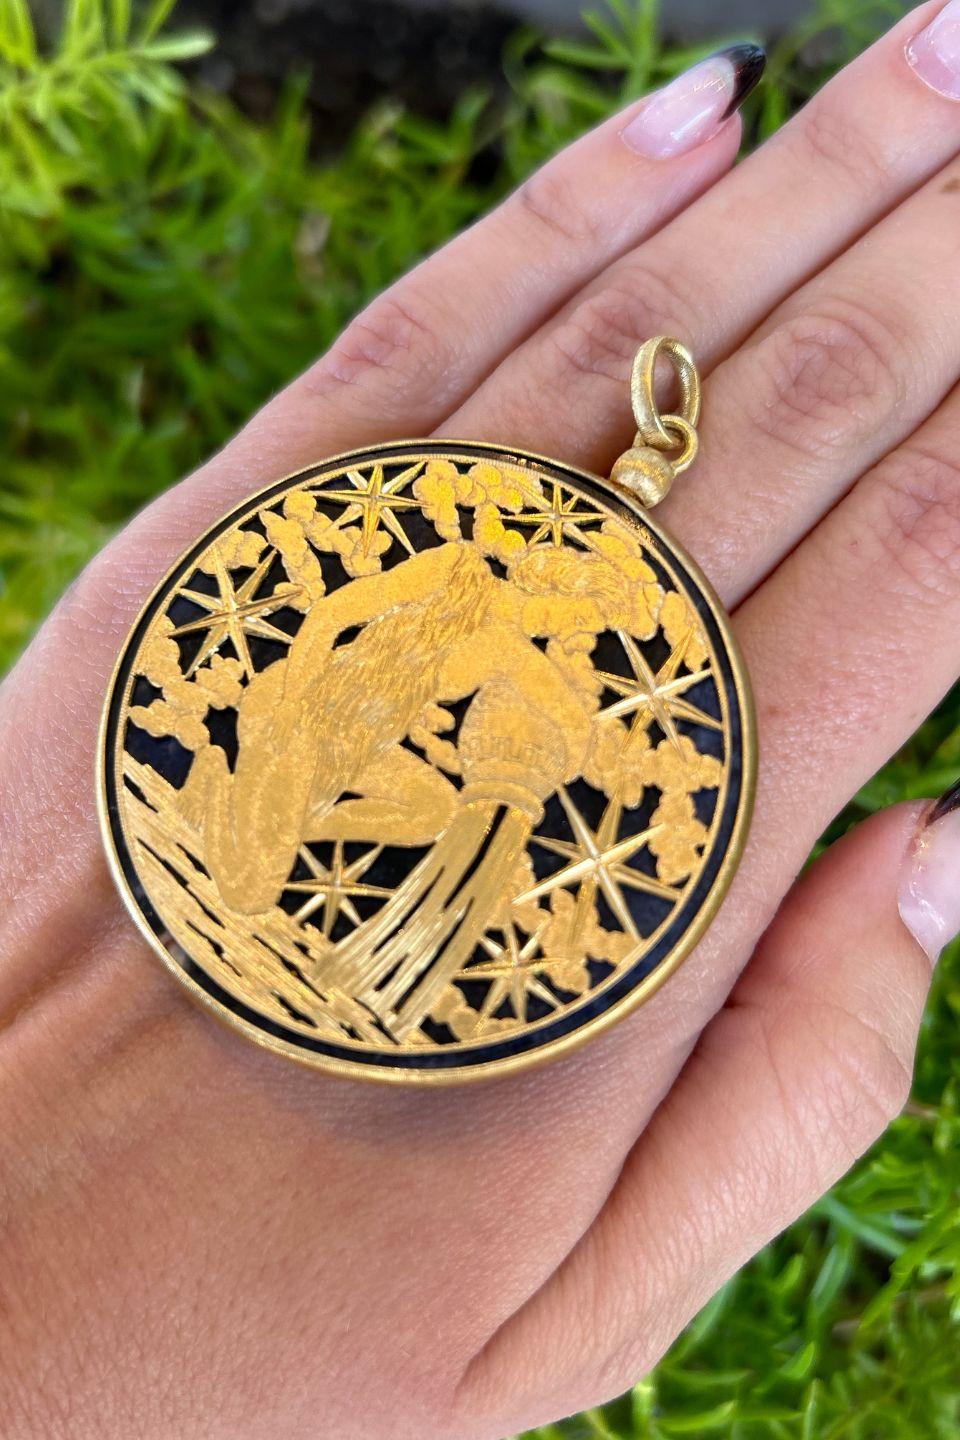 Buccellati Vintage 18K Yellow Gold Zodiac Aquarius Coin Pendant (One of a Kind) In Excellent Condition For Sale In Carmel By The Sea, CA